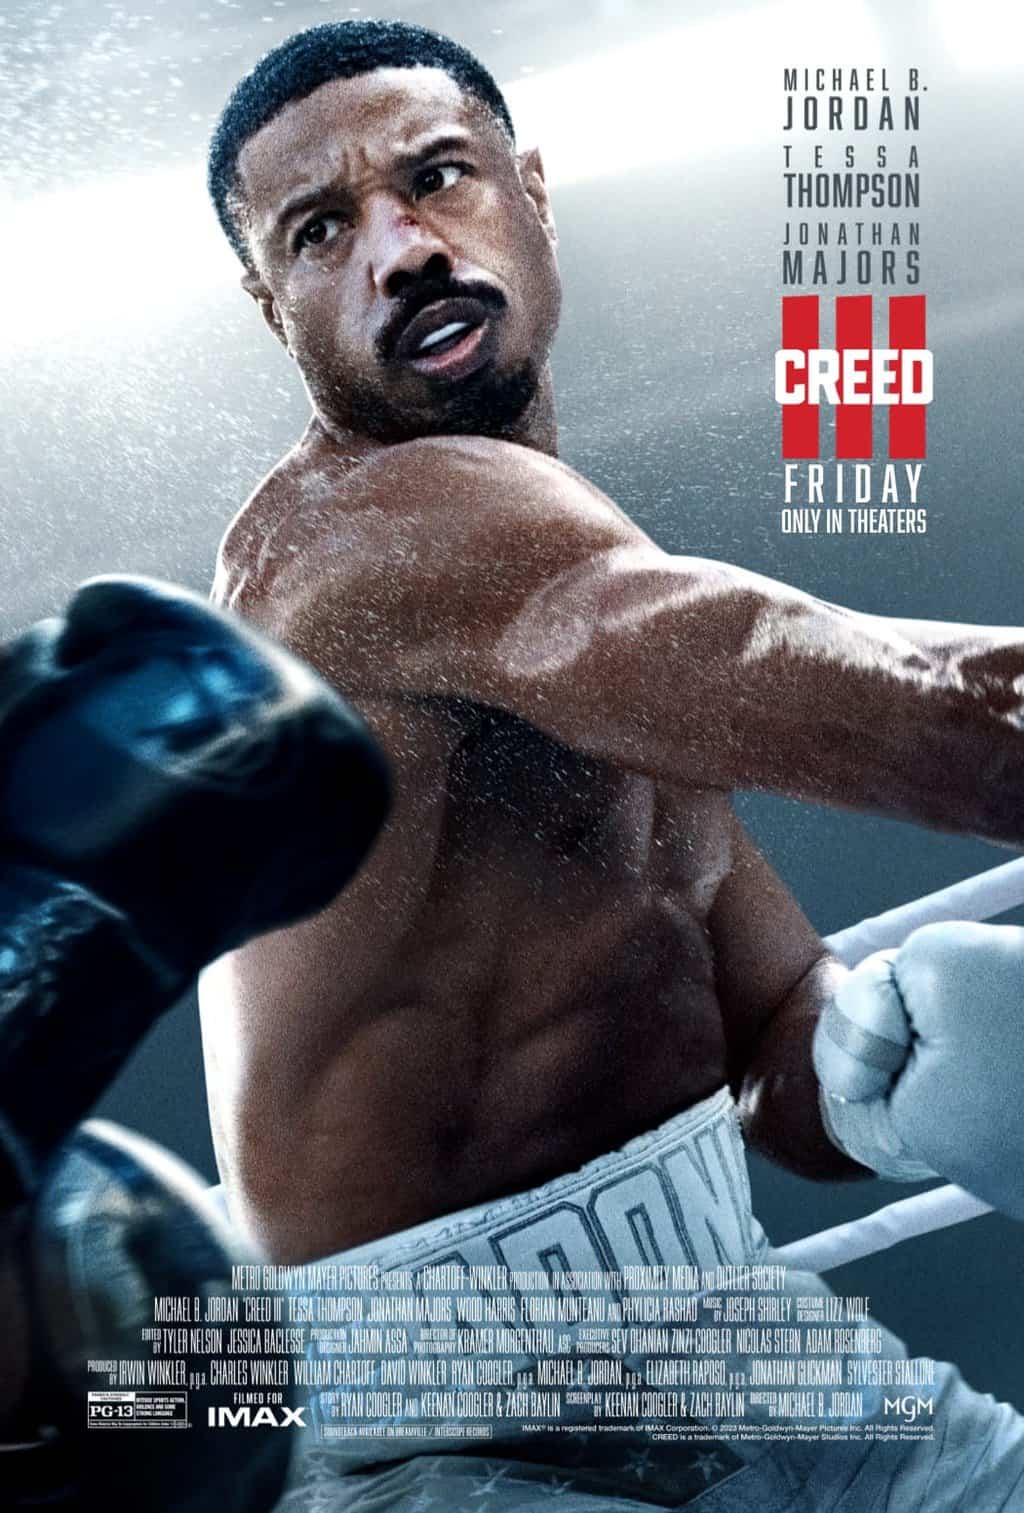 Rocky movies to watch before Creed III. Movie Poster showing a boxer hitting someone wearing white trunks.